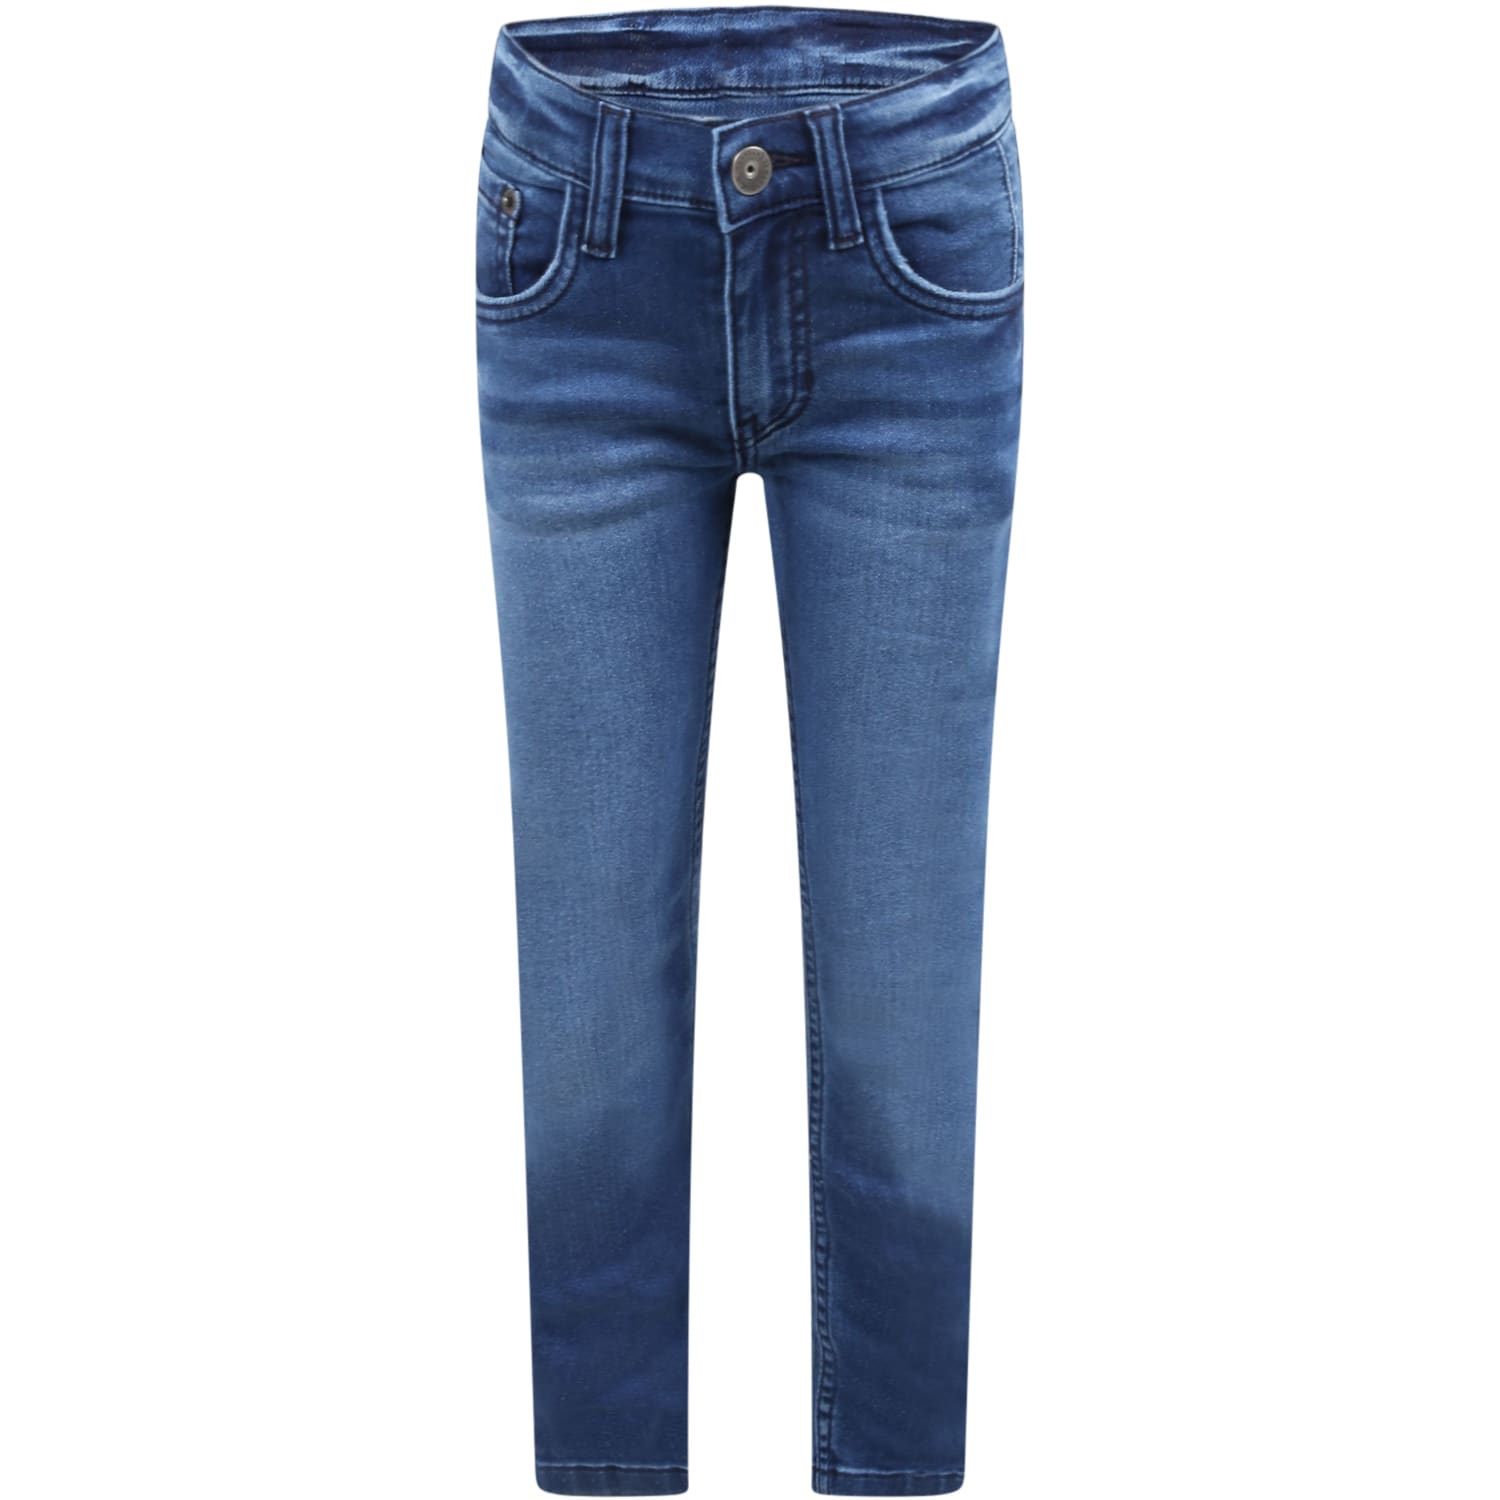 Timberland Blue Jeans For Boy